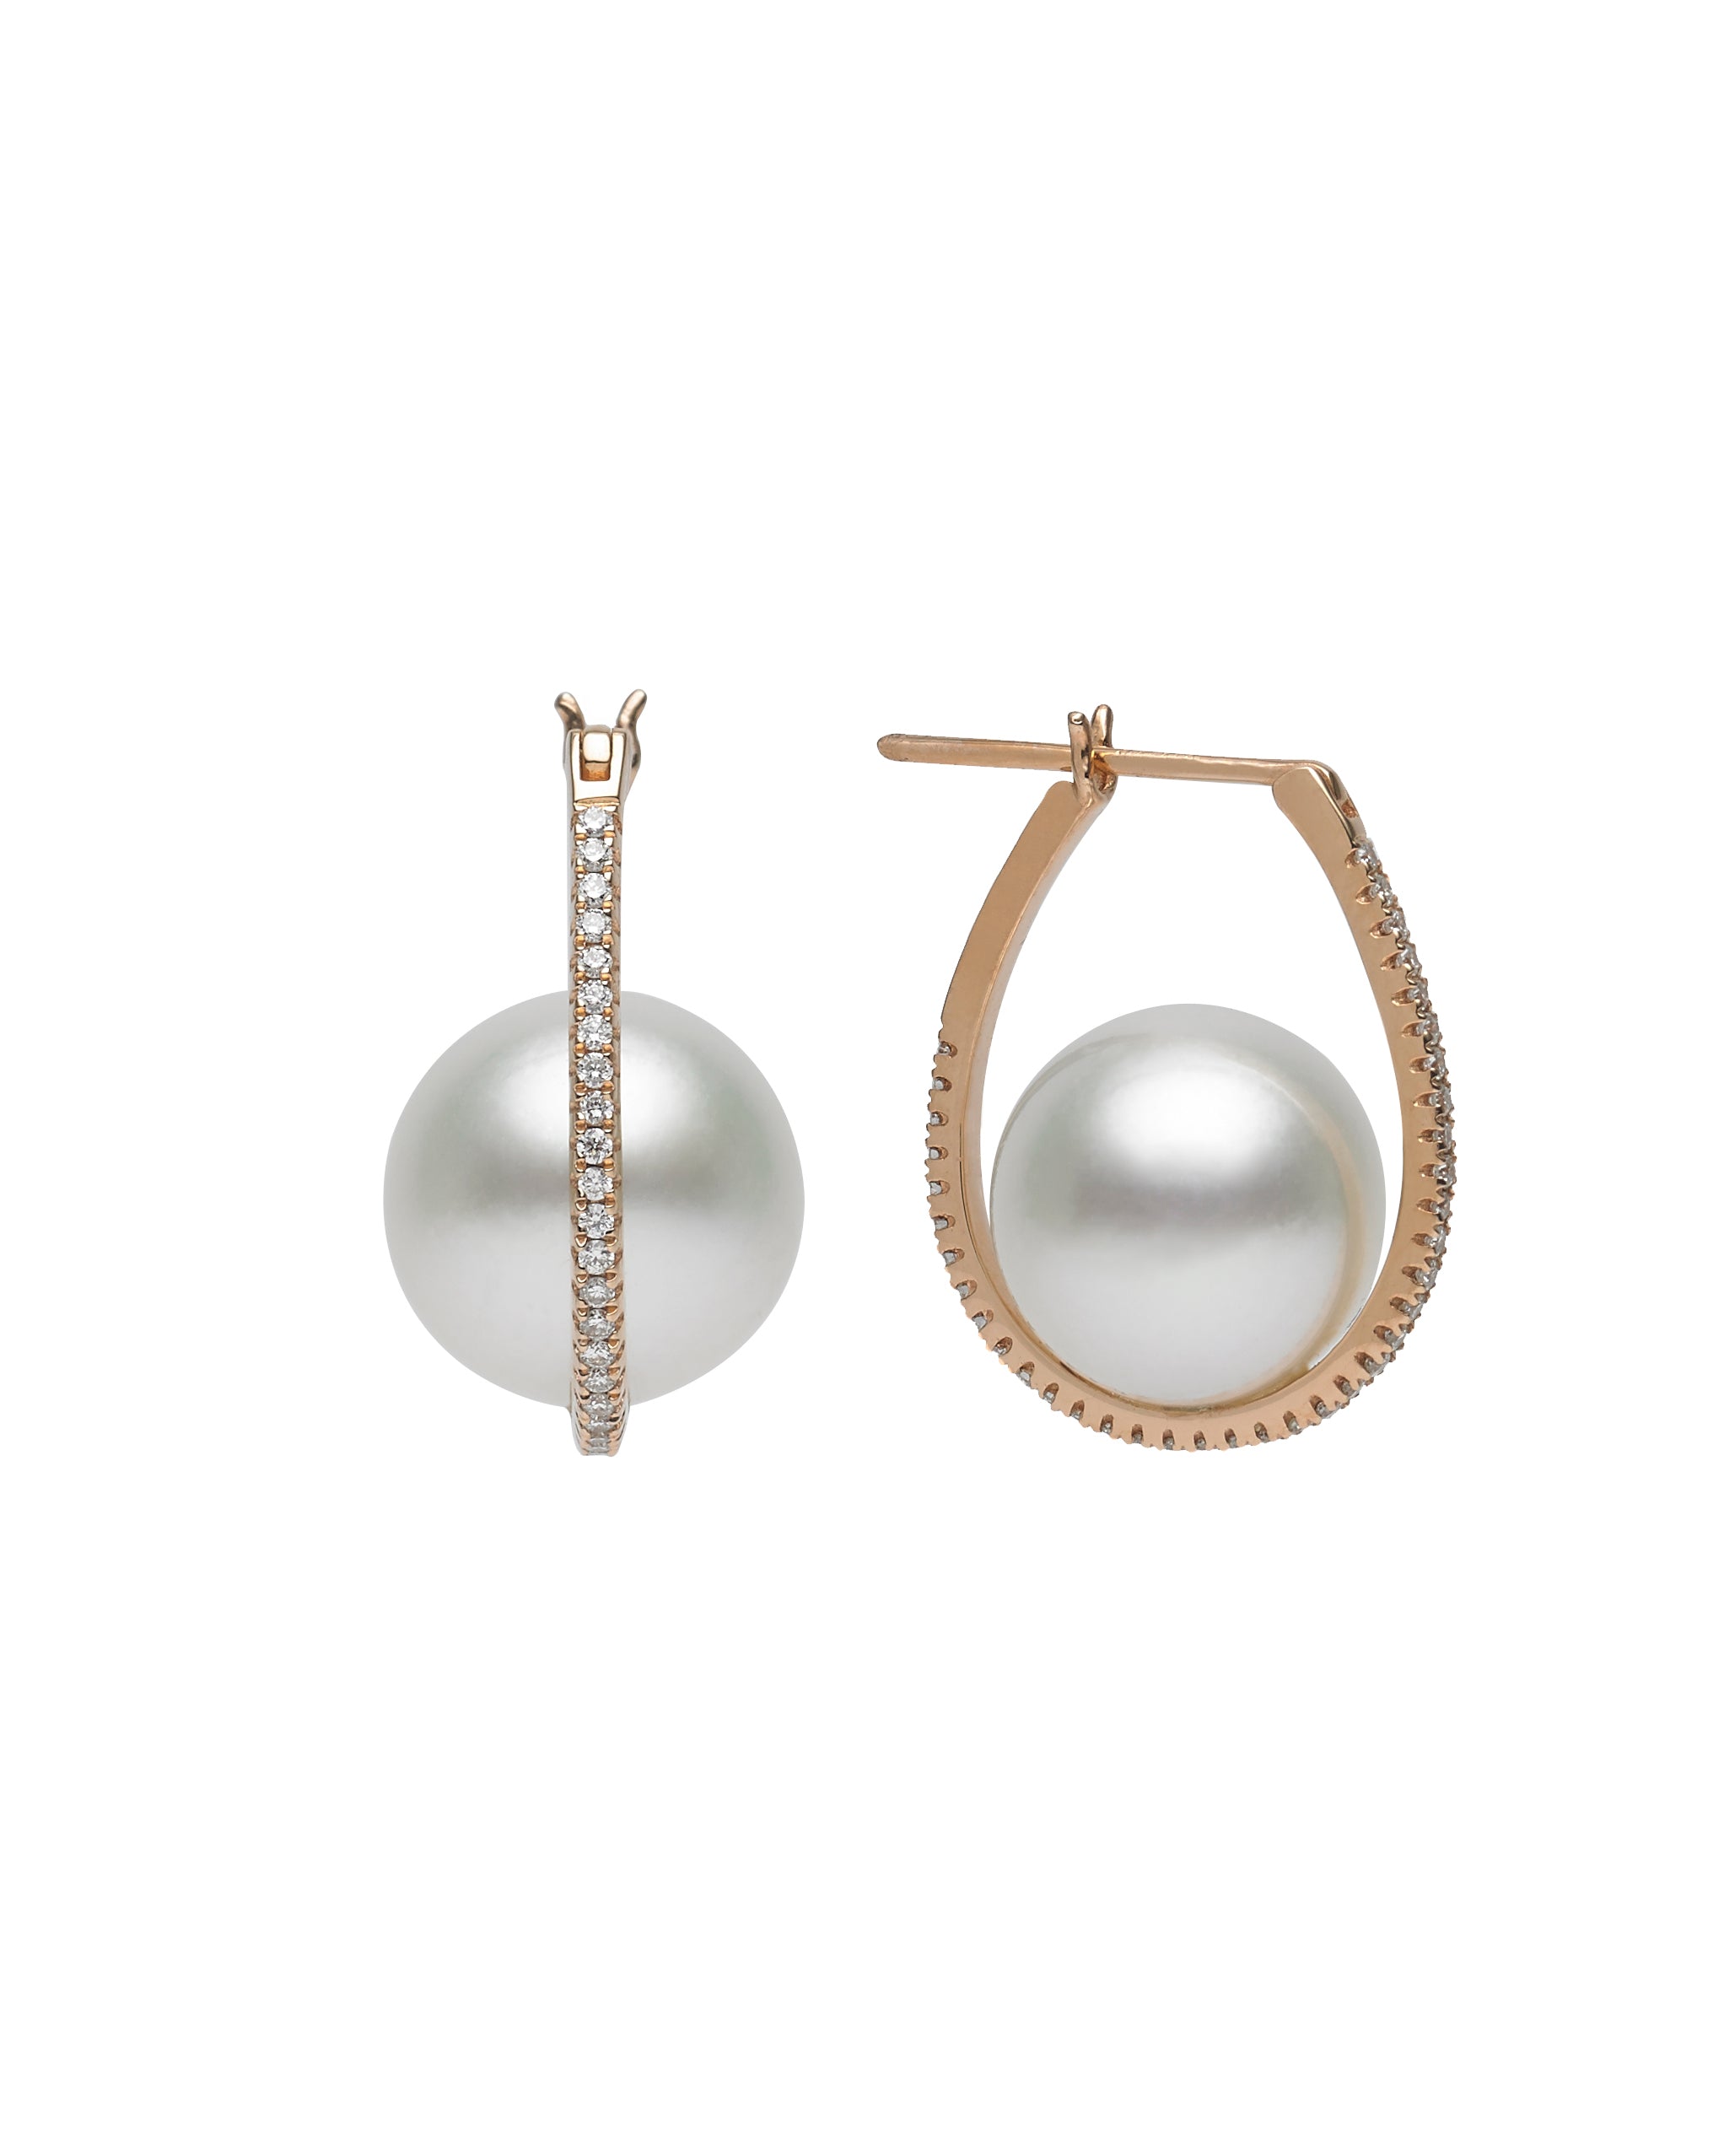 Galaxy Collection 10-11mm White South Sea Pearl and Diamond Earrings